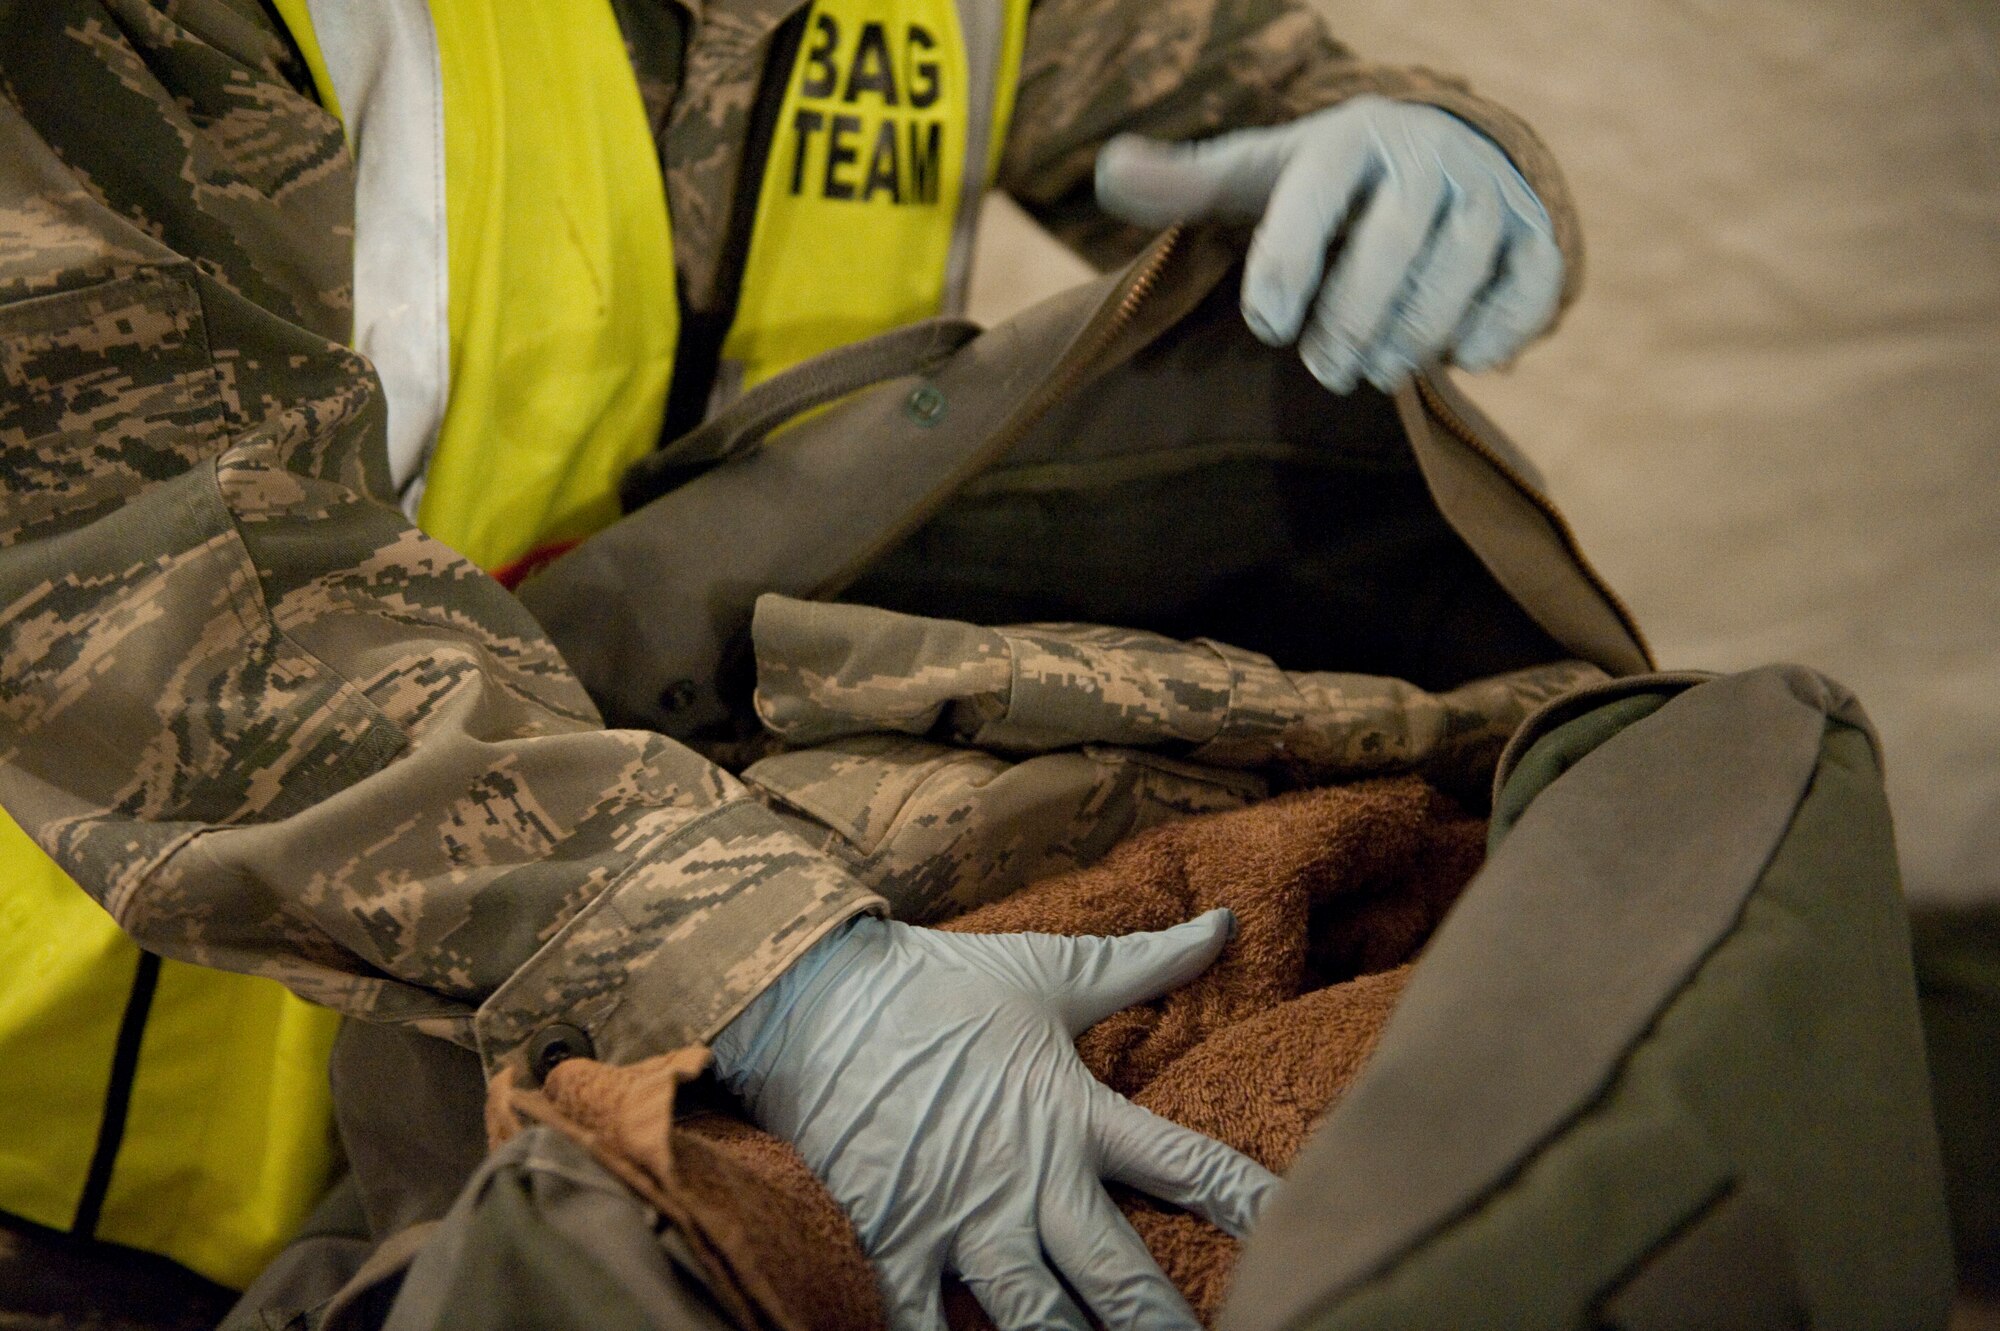 HOLLOMAN AIR FORCE BASE, N.M. -- Airman 1st Class Robert Skvarla, 49th Force Support Squadron, inspects a mobility bag during a base exercise Jan. 25, 2011. The bag team inspects each Airman's bag for completeness and readiness for deployment. This specific exercise is designed to test an Airman's ability and readiness to deploy, and helps to prepare the base for its upcoming Operational Readiness Inspection. (U.S. Air Force photo by Senior Airman Veronica Stamps / Released)